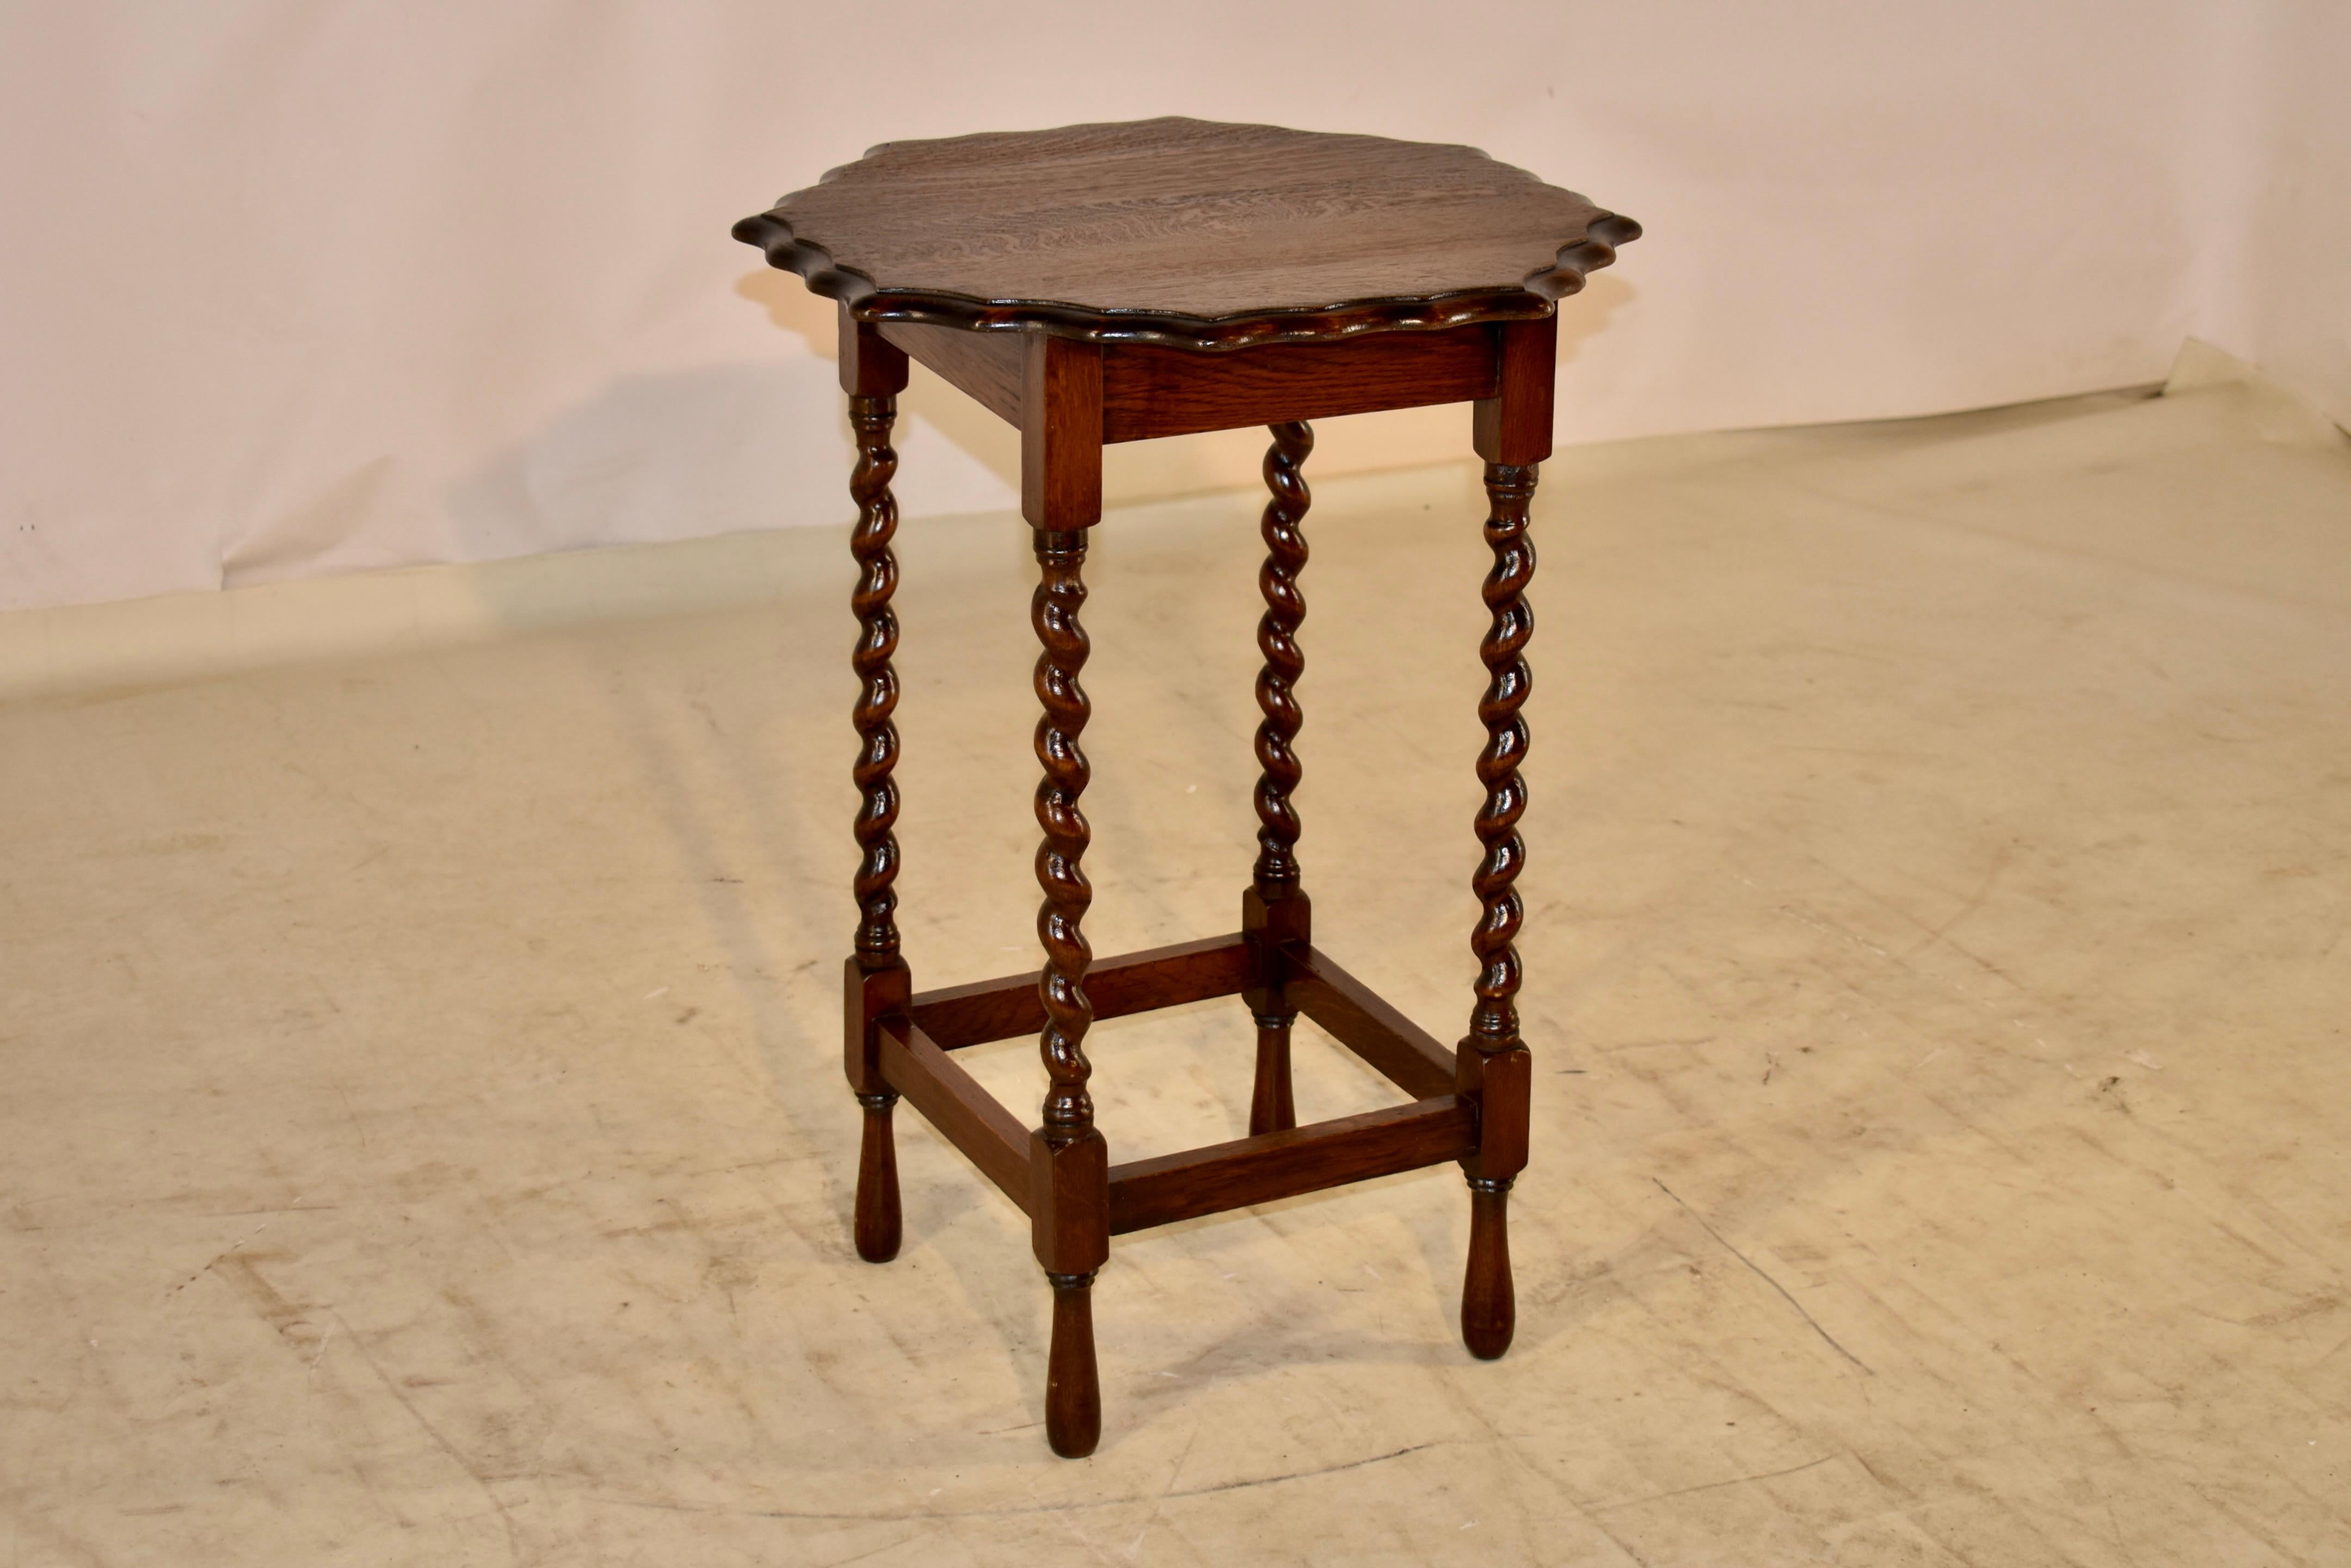 Circa 1900 Edwardian oak side table. The top is an octagonal shape and has lovely beveled and scalloped edges, following down to a simple apron and supported on hand turned barley twist legs, joined by simple stretchers. The table is raised on hand